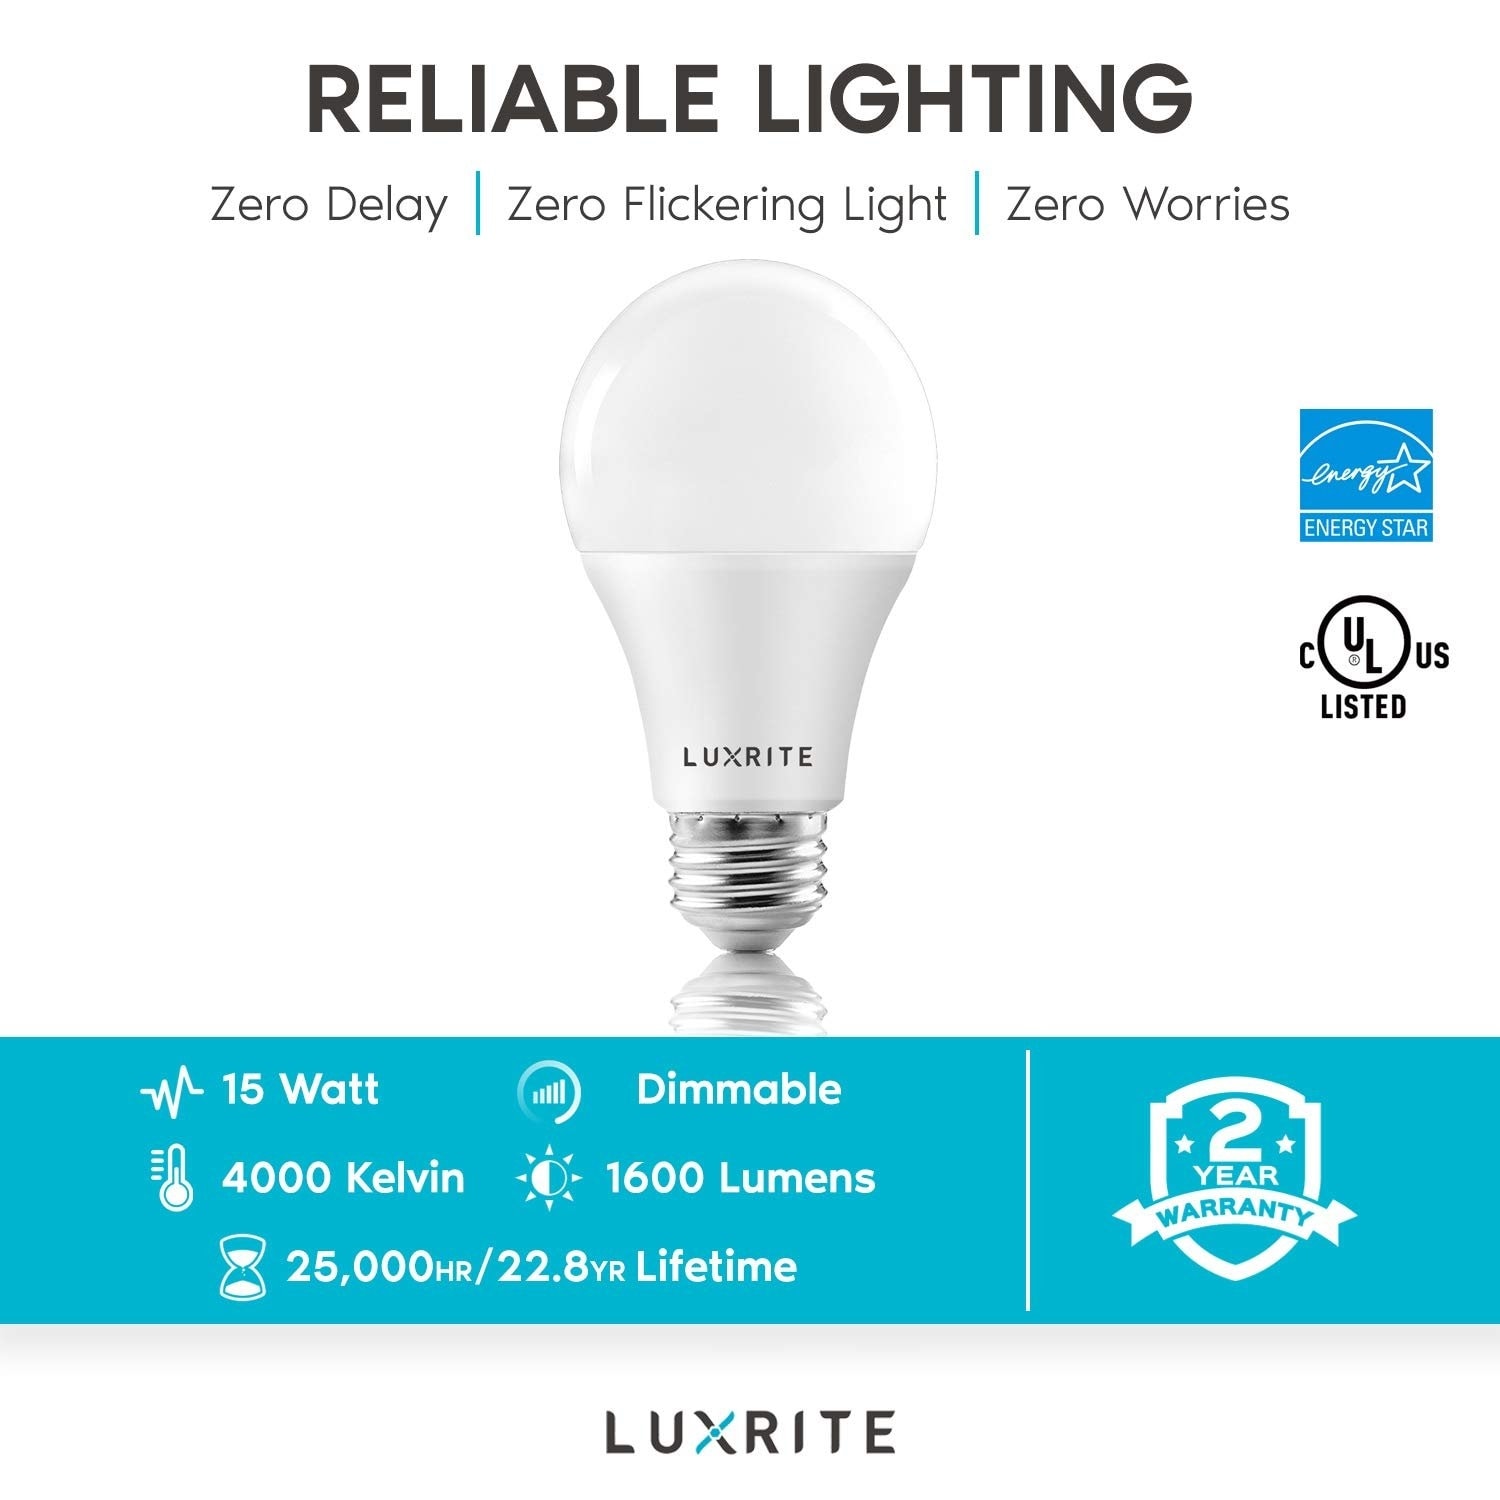 Luxrite A19 LED Light Bulbs 100W Equivalent Dimmable, 1600 Lumens, Enclosed  Fixture Rated, Energy Star, E26 Base 4-Pack On Sale Bed Bath  Beyond  28797561